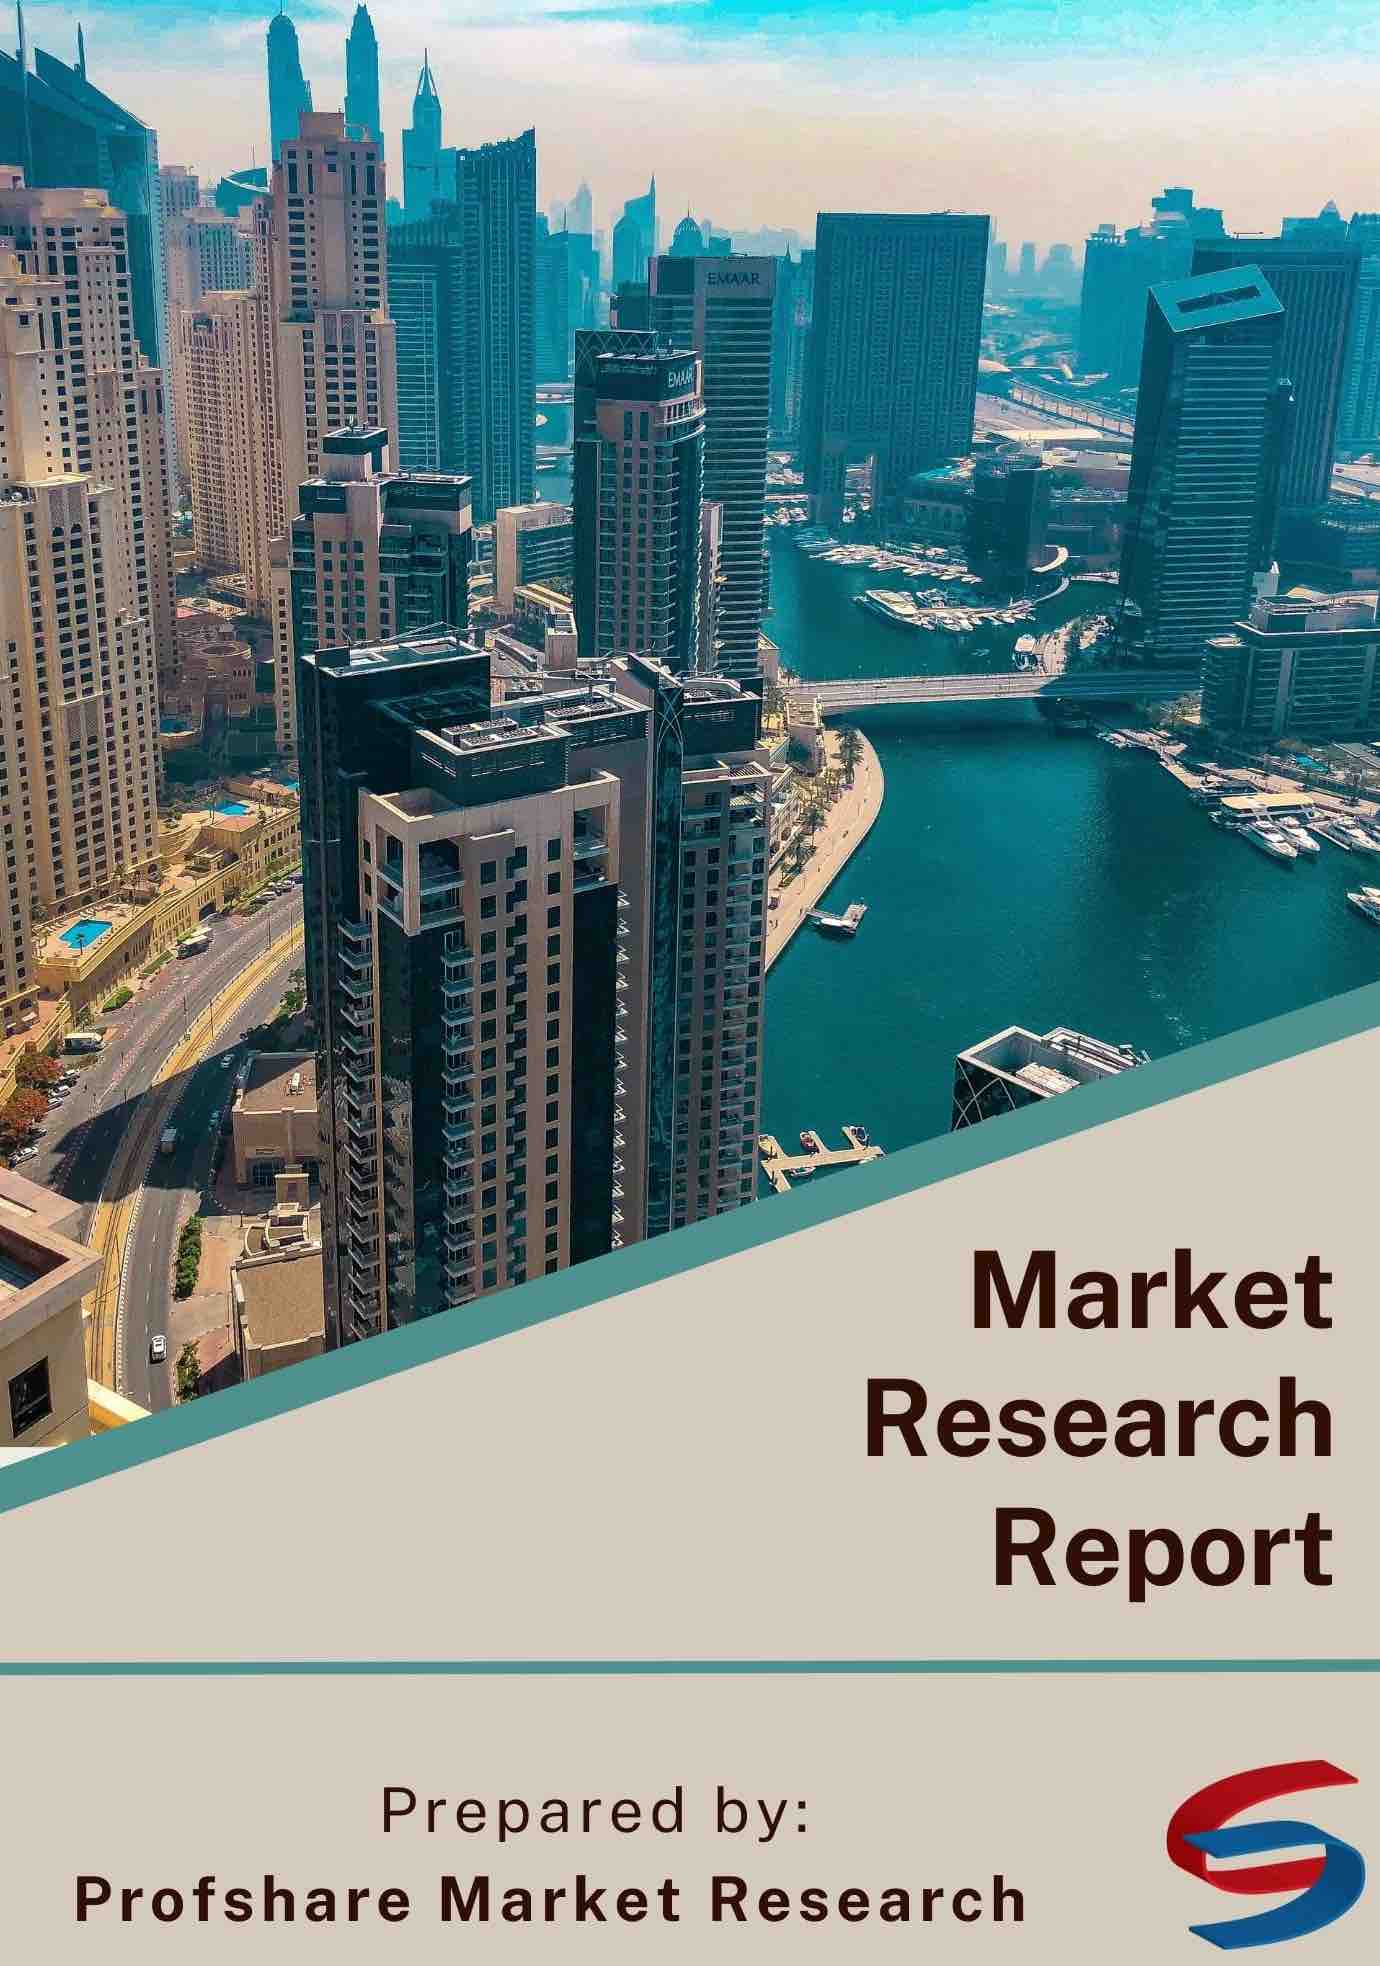  Research Report